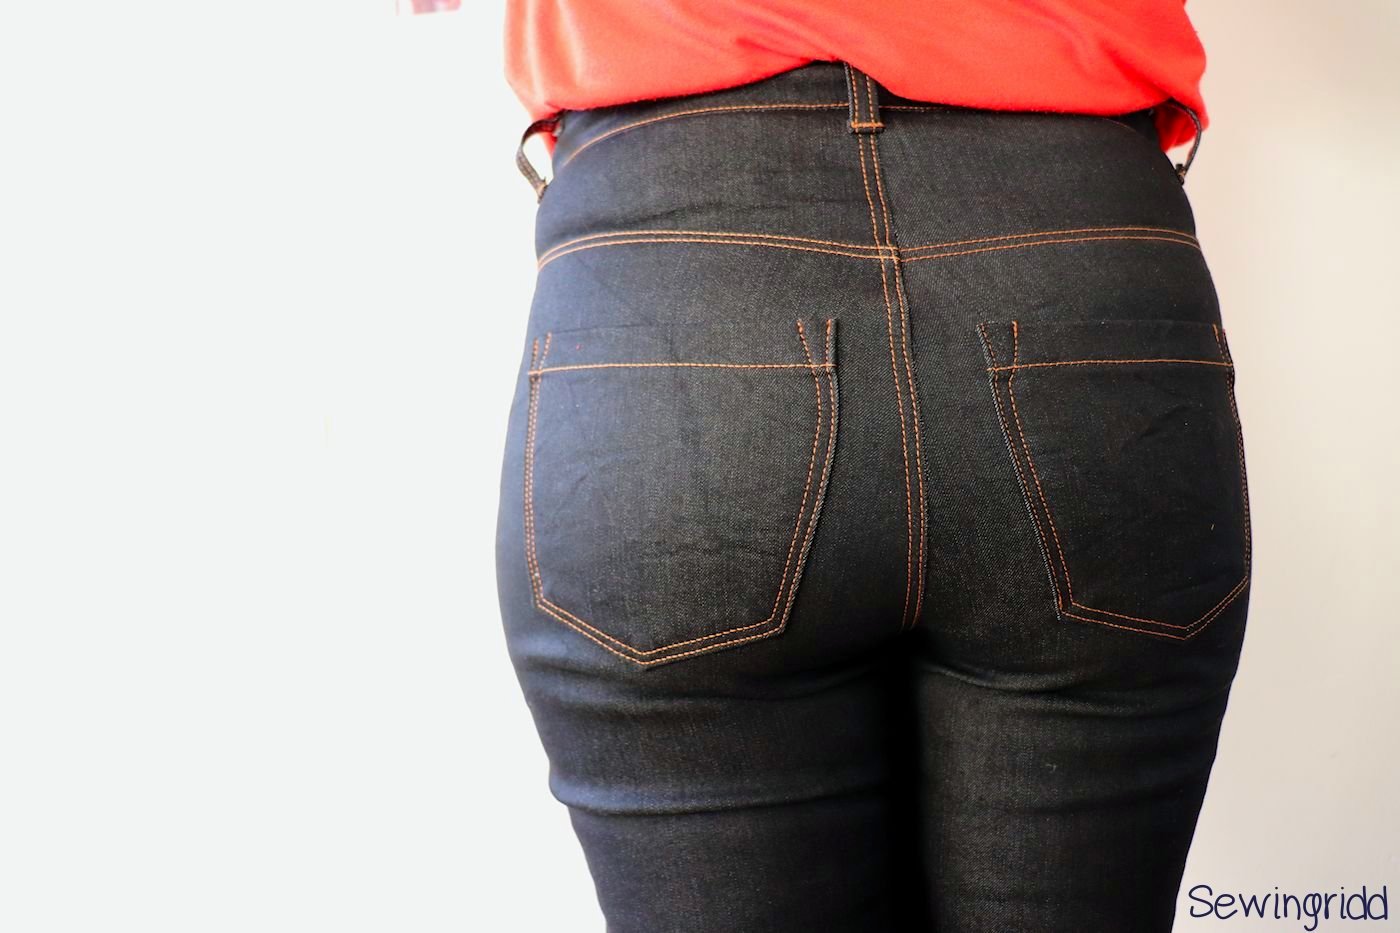 High waisted Ginger Jeans sewn by Sewingridd